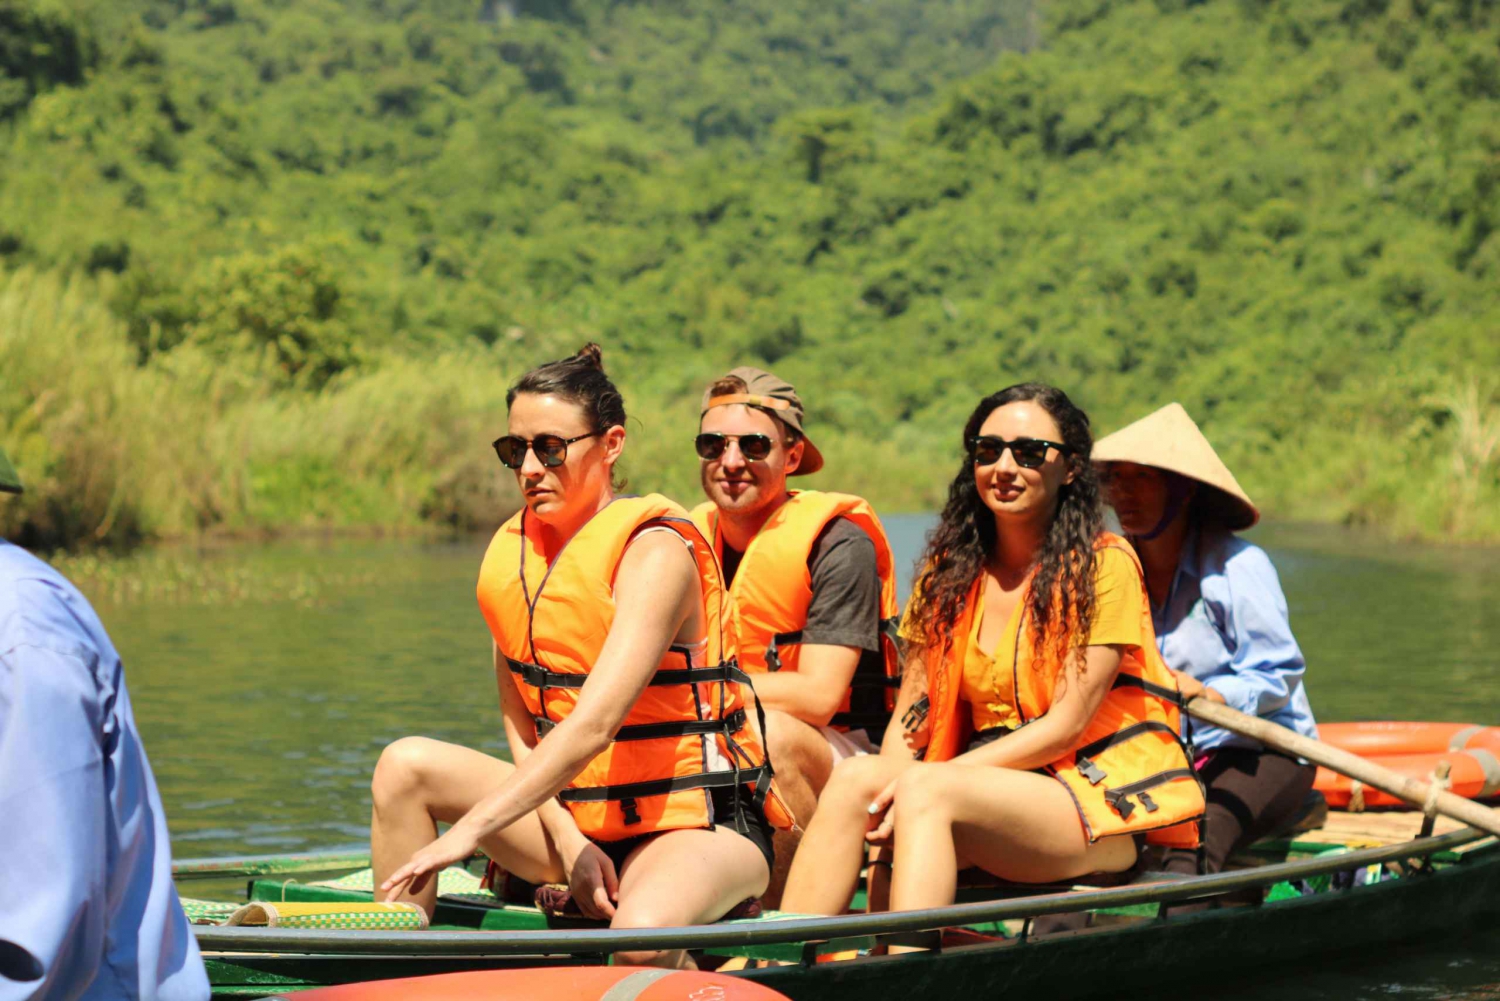 1 Day Luxury Tour in Bai Dinh, Trang An and Mua Cave